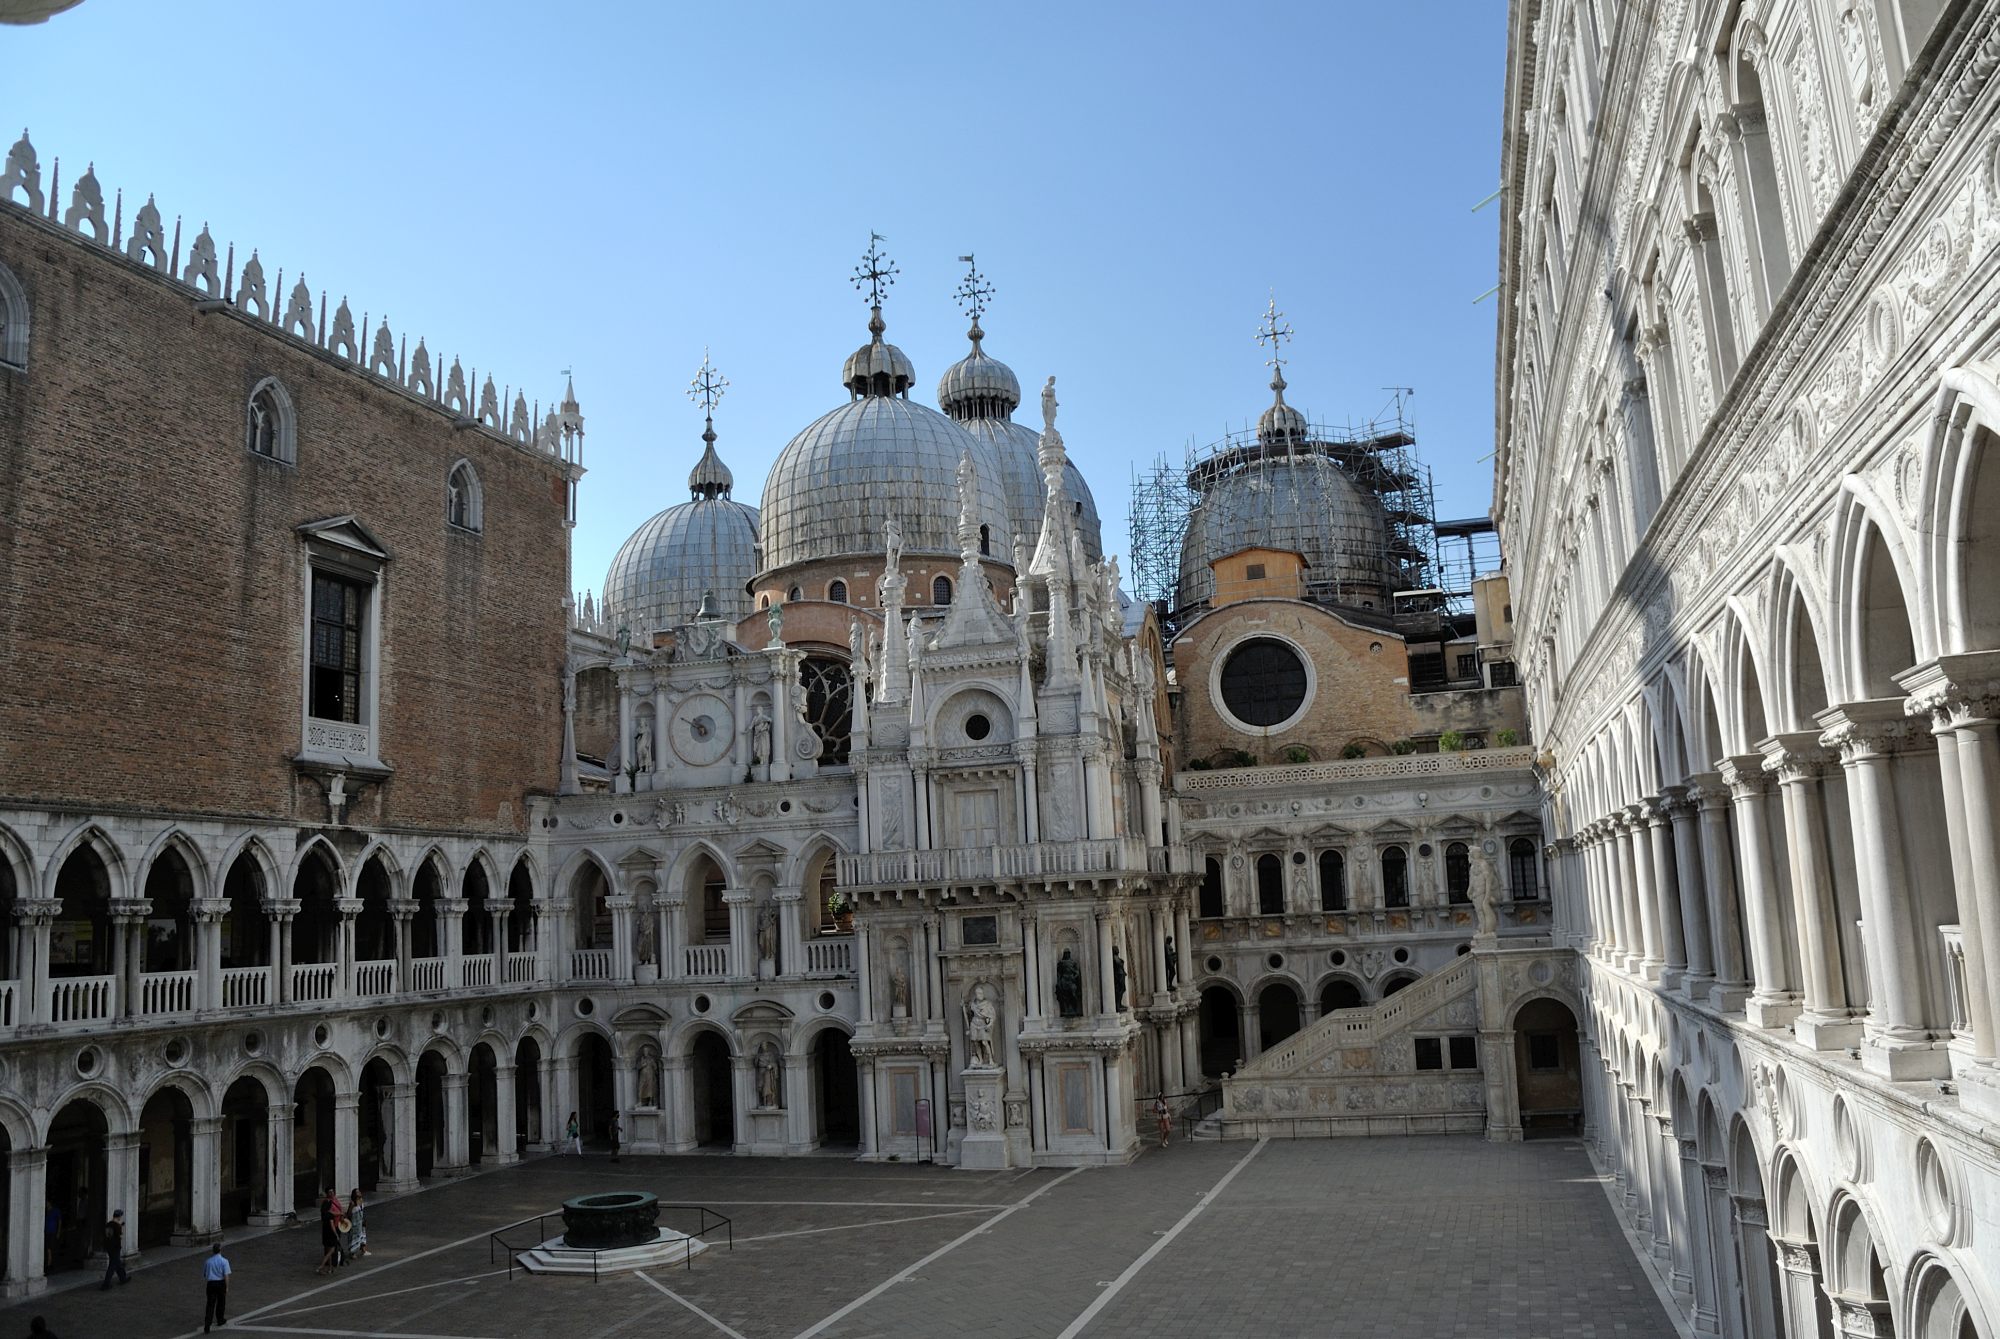 Inside the courtyard of Doge Palace.